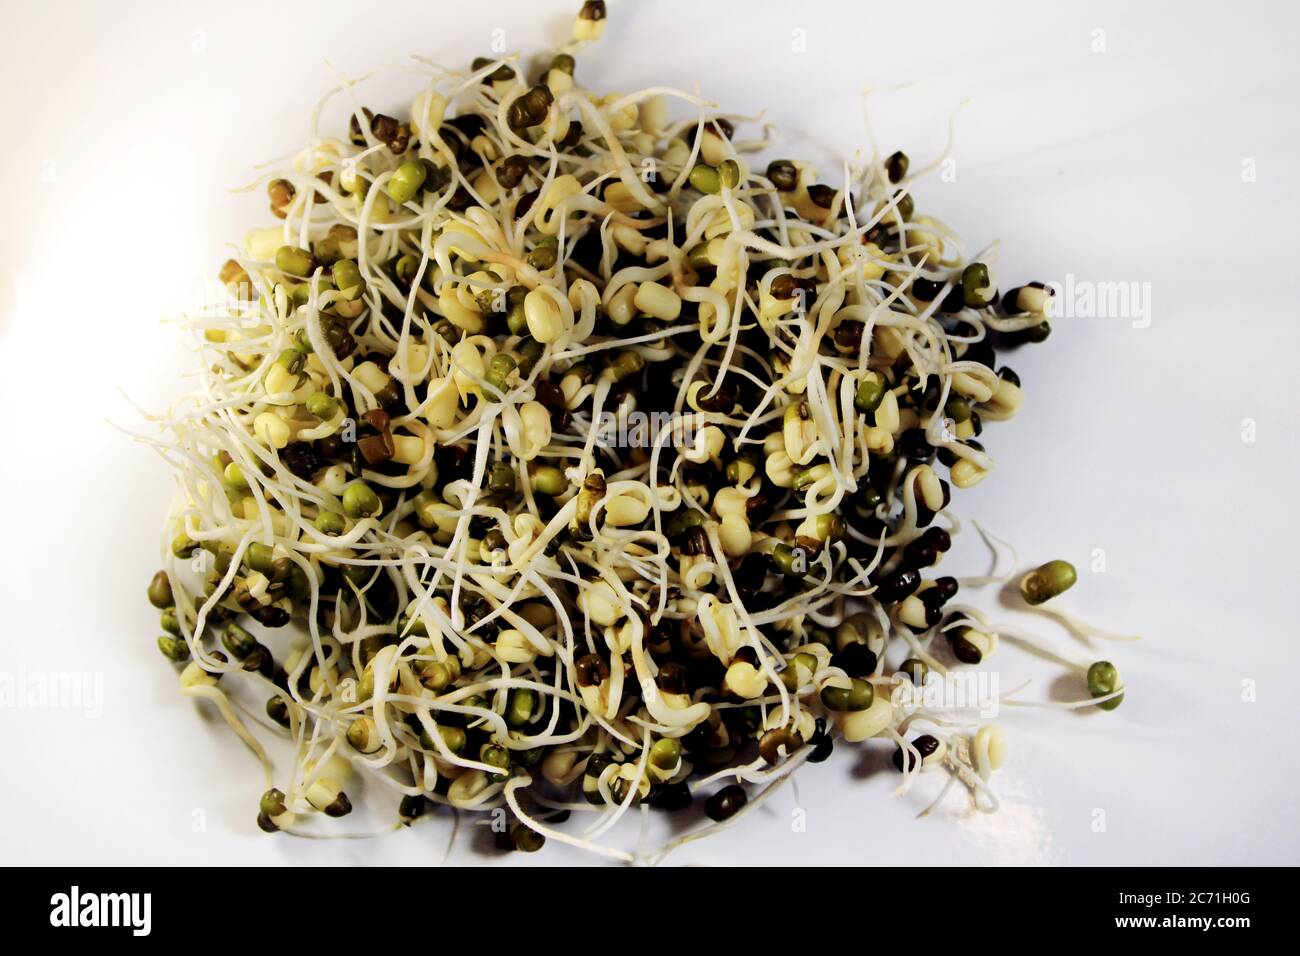 Fresh Sprouted green gram isolated with white background. Fresh, healthy sprouted mung dal or moong beans. Stock Photo